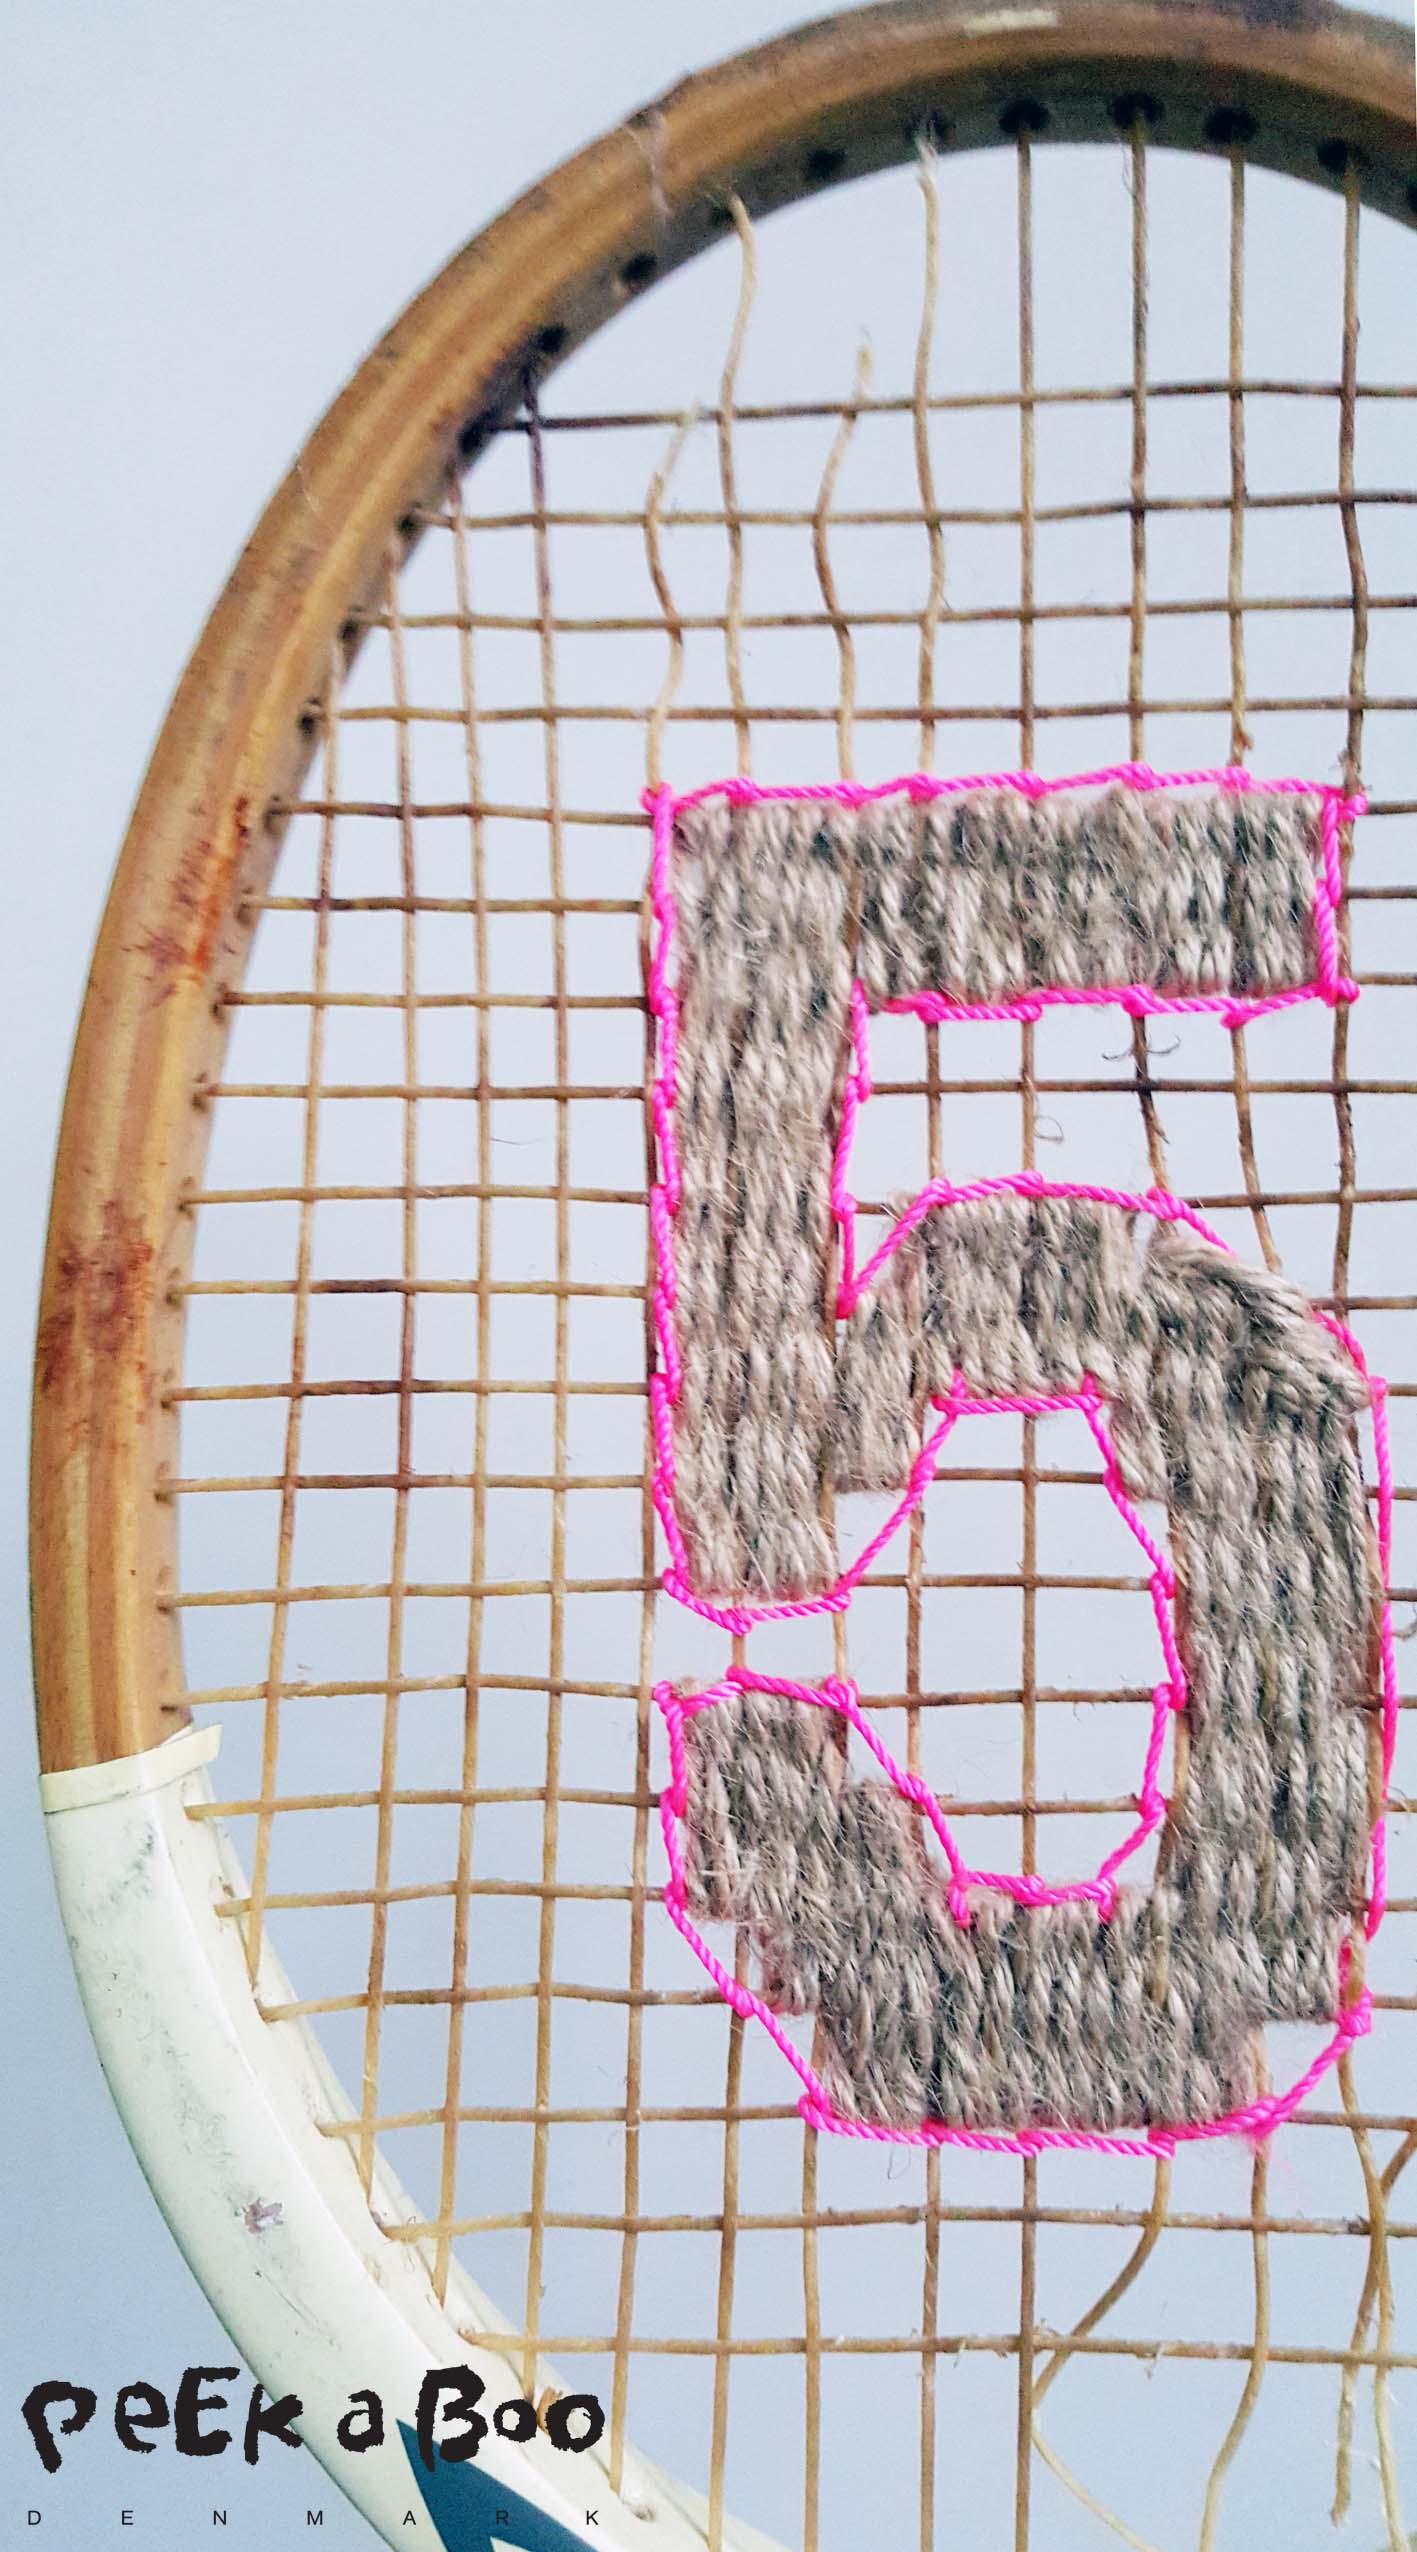 DIY vintage tennis racket for your home decor. Made by Peekaboo design.